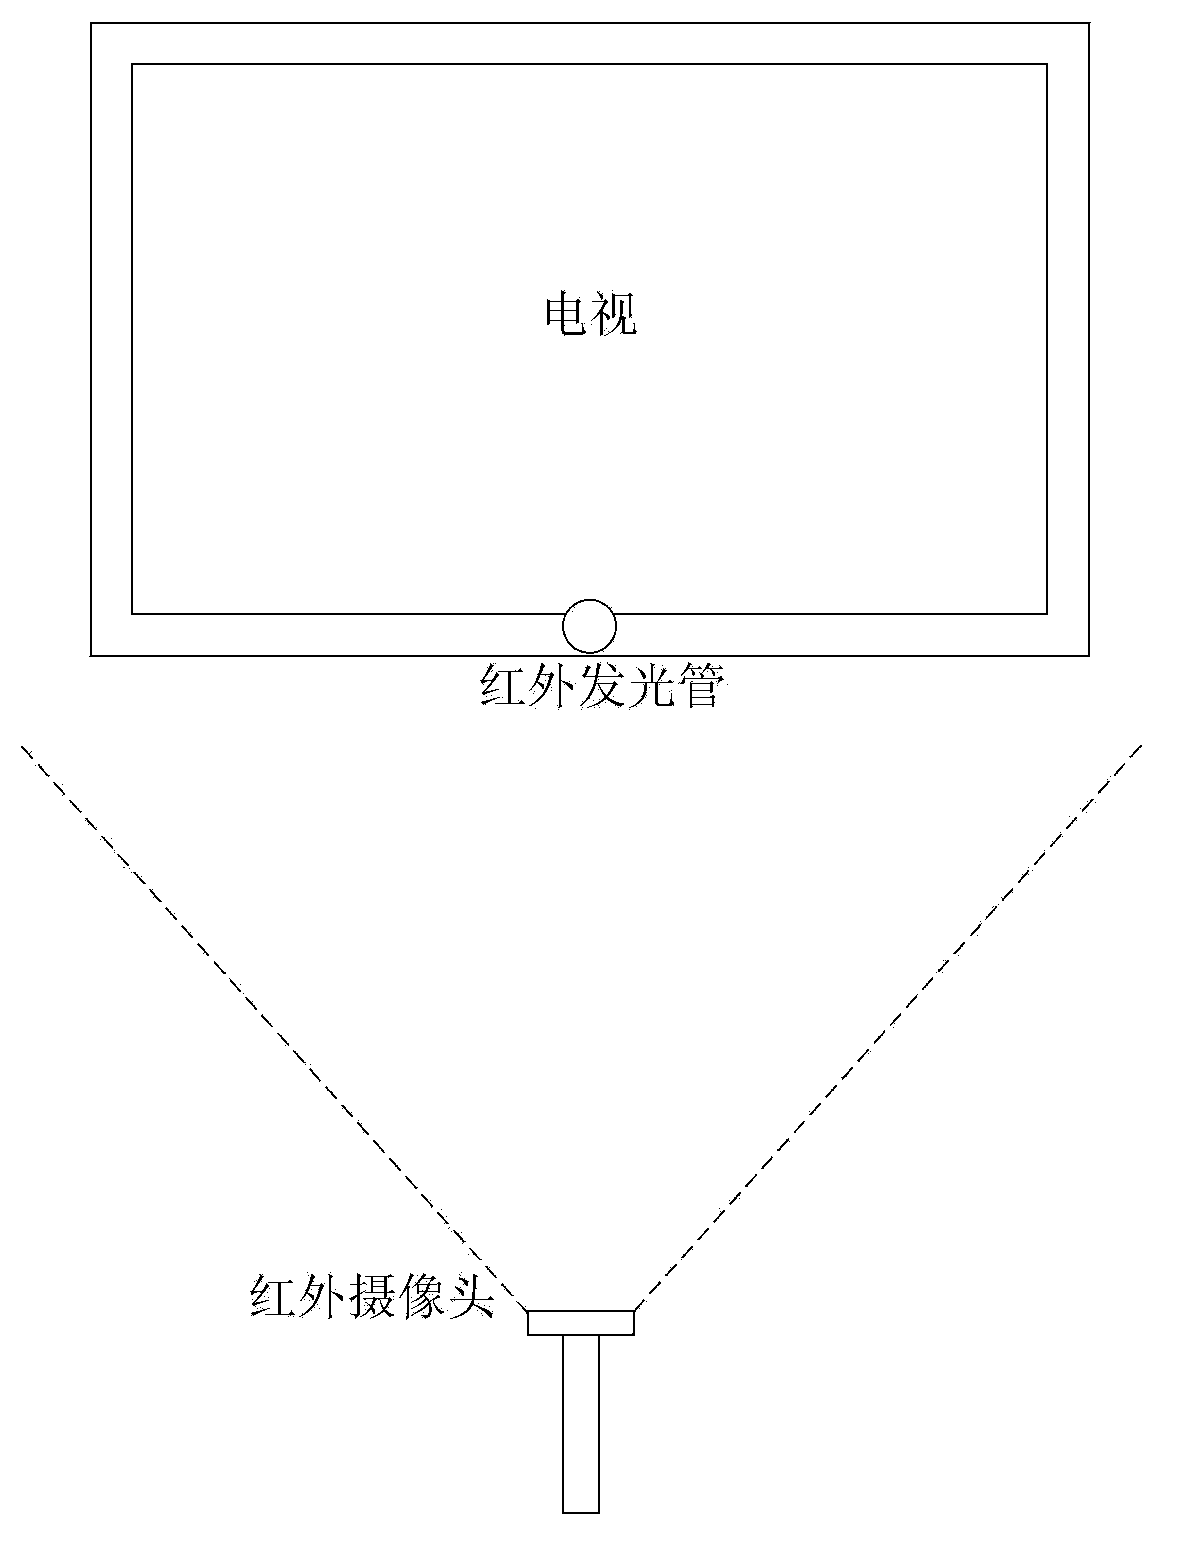 Control method and electronic devices